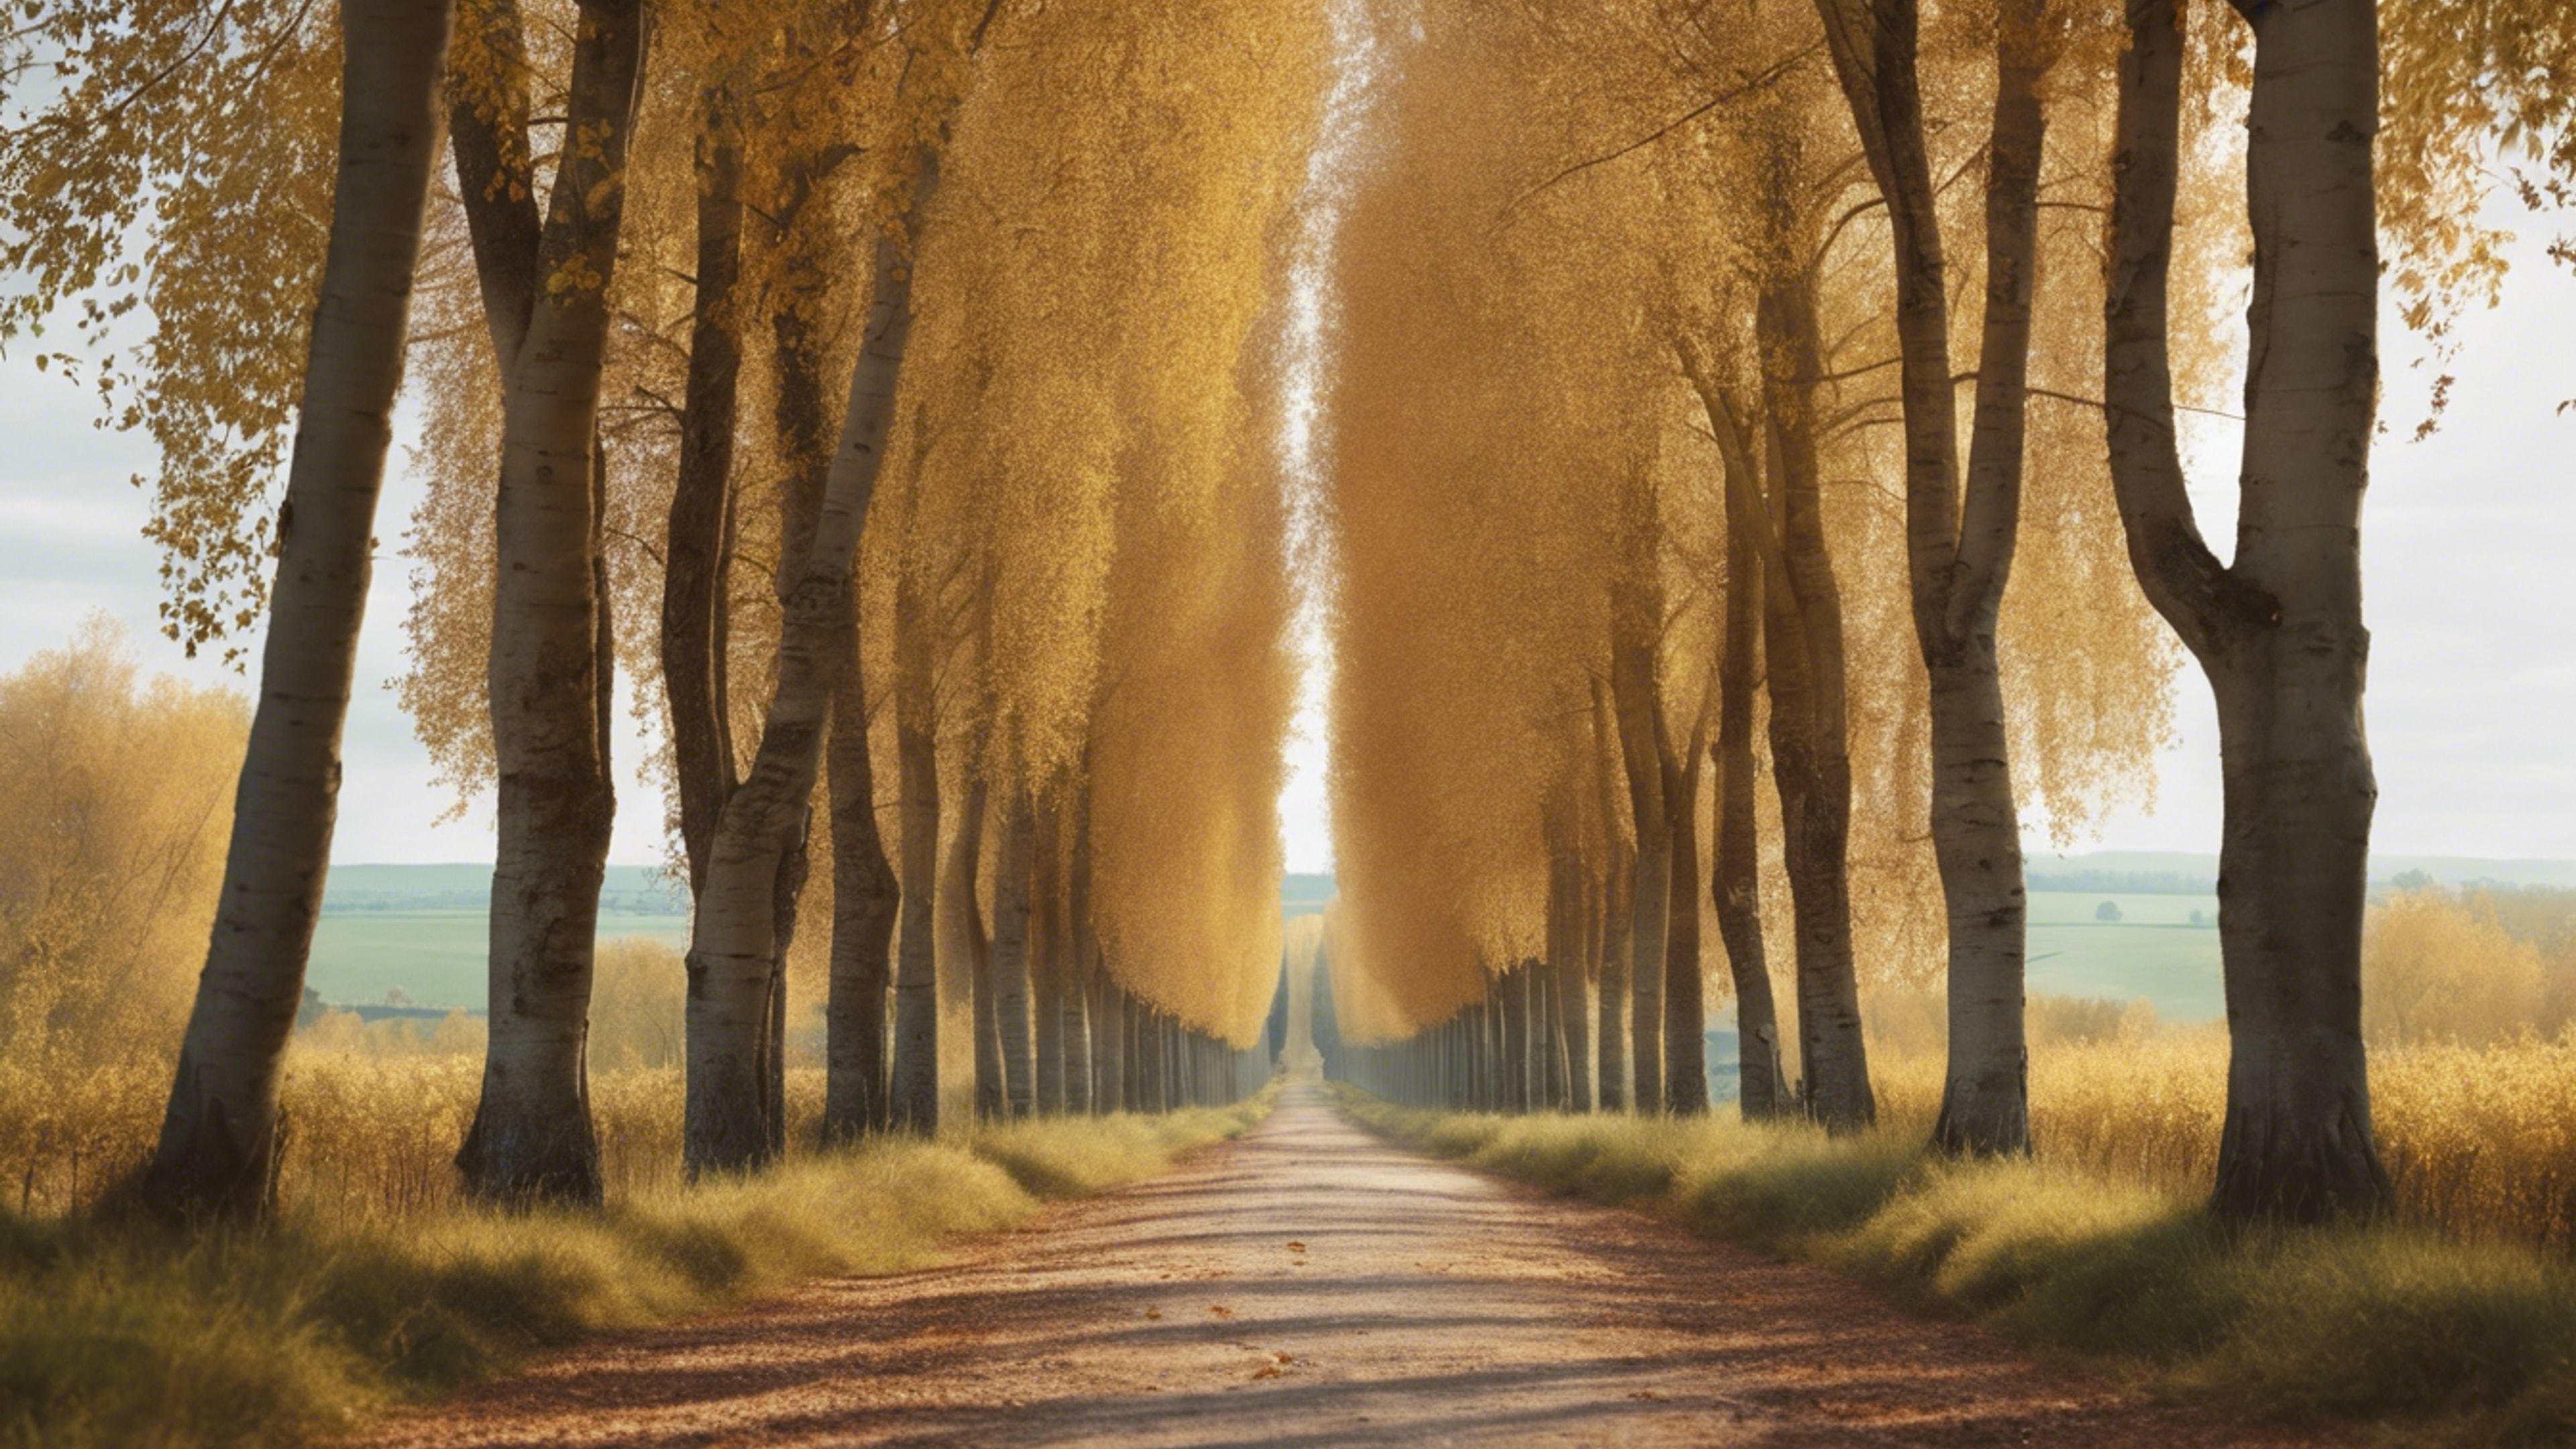 A peaceful French country lane lined with tall, mature poplar trees in autumn. Tapeta[76d1ad7093004c7494eb]